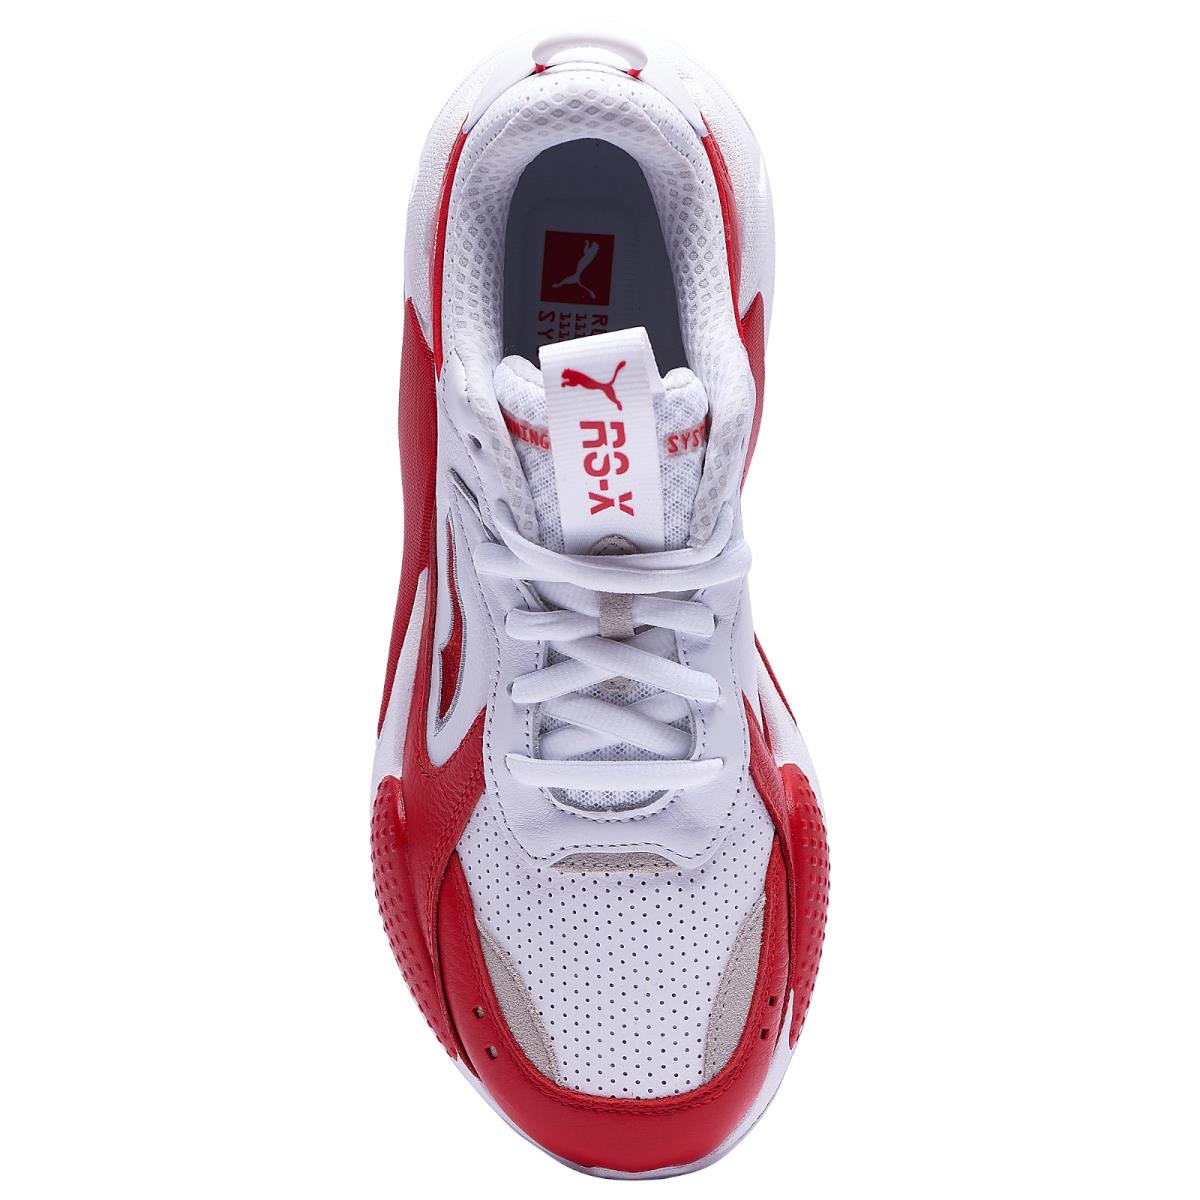 Puma Rs-x 374486-03 Men`s Running Casual Shoes White/red Sneakers 